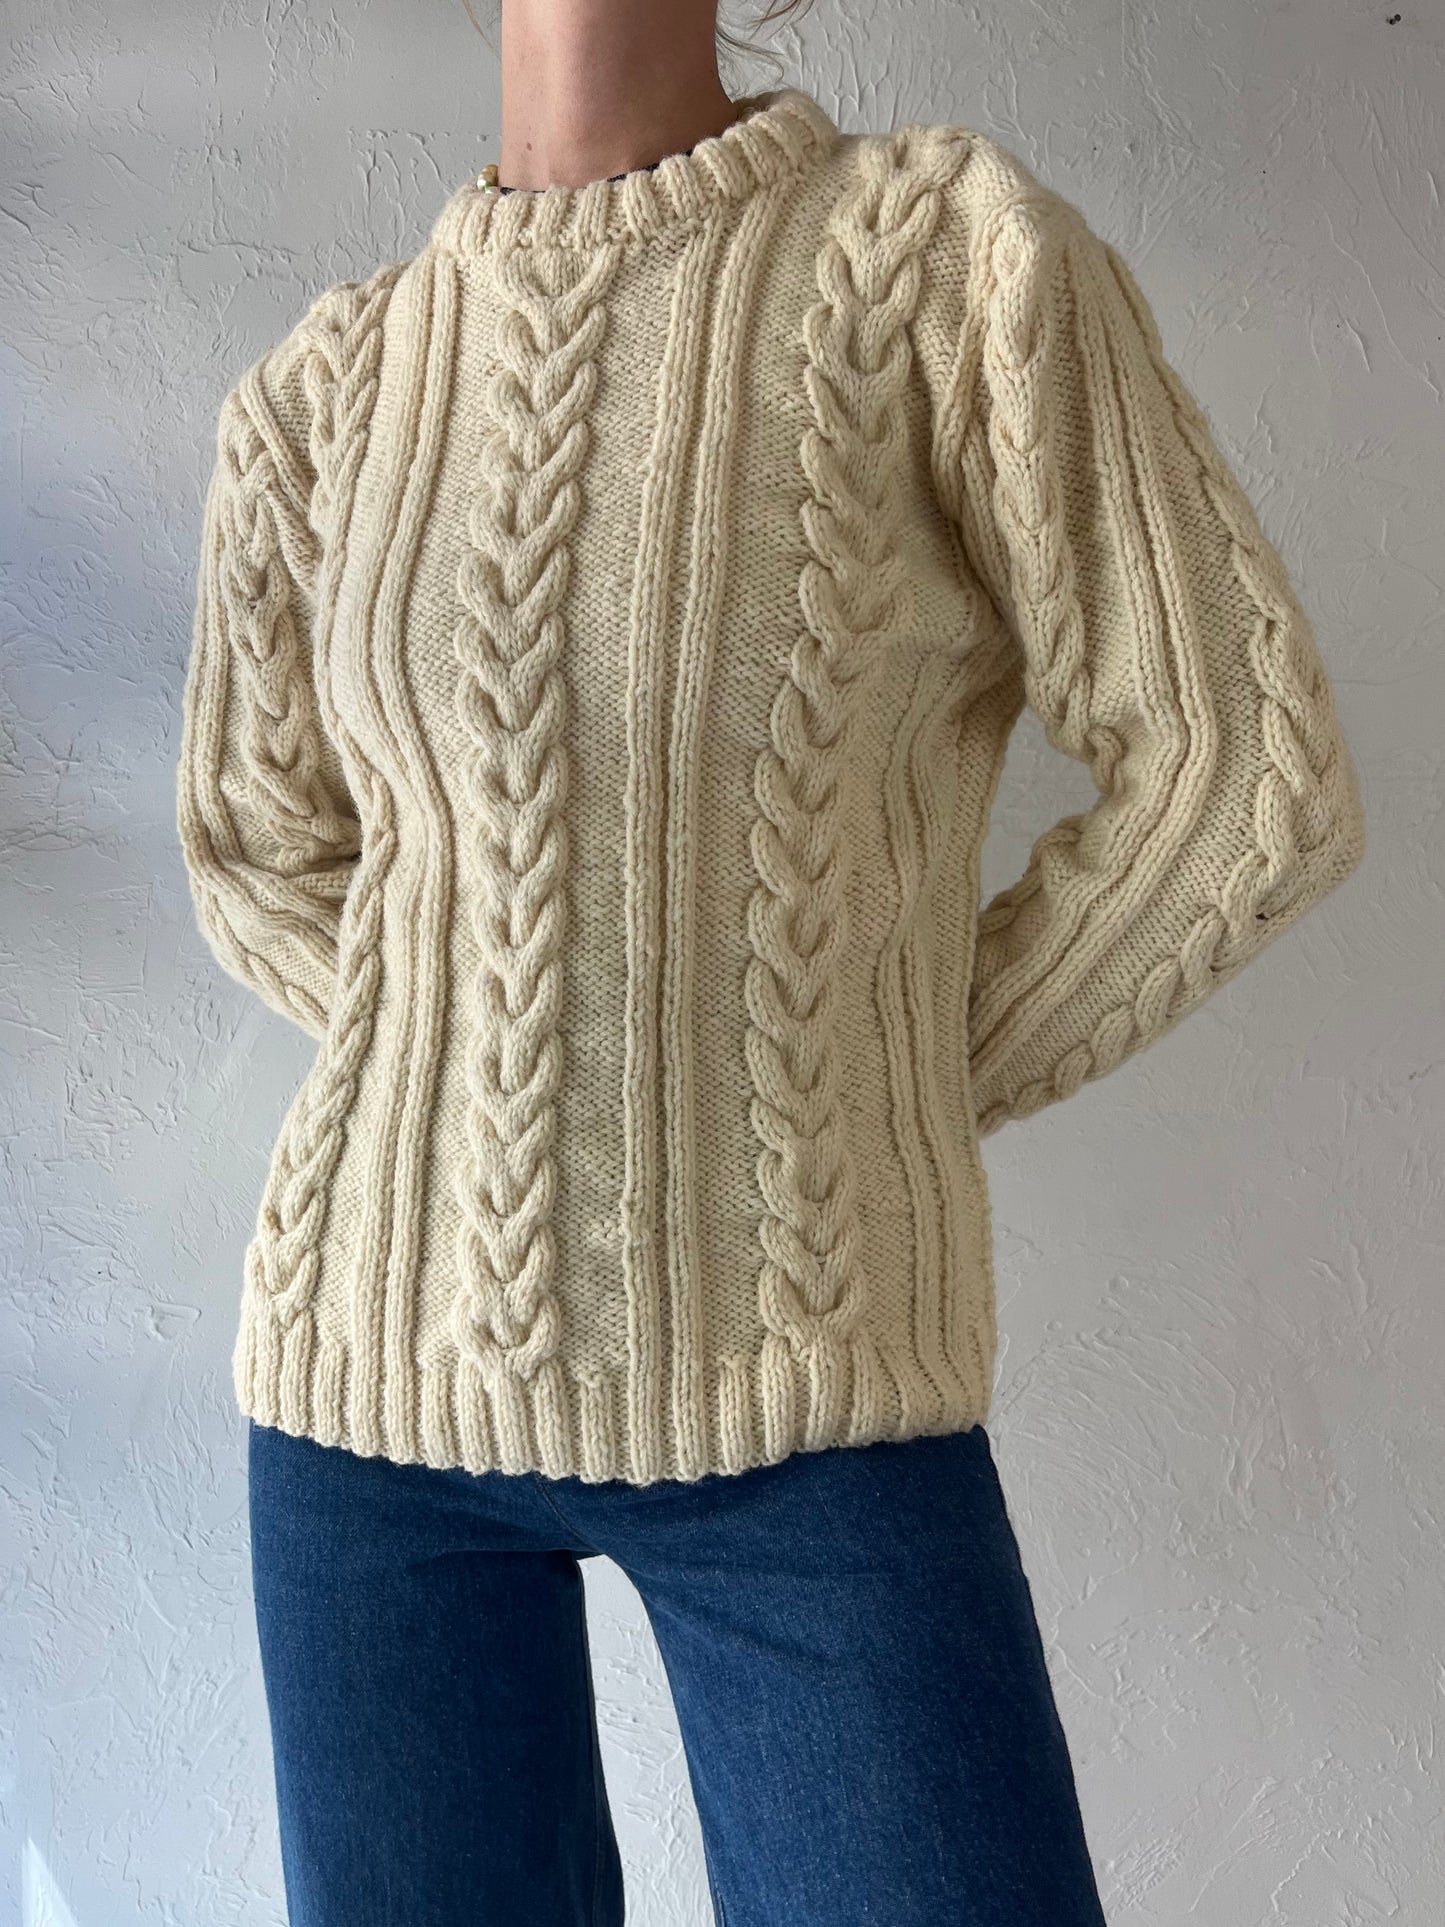 Vintage Mock Neck Cream Cable Knit Acrylic Wool Blend Sweater